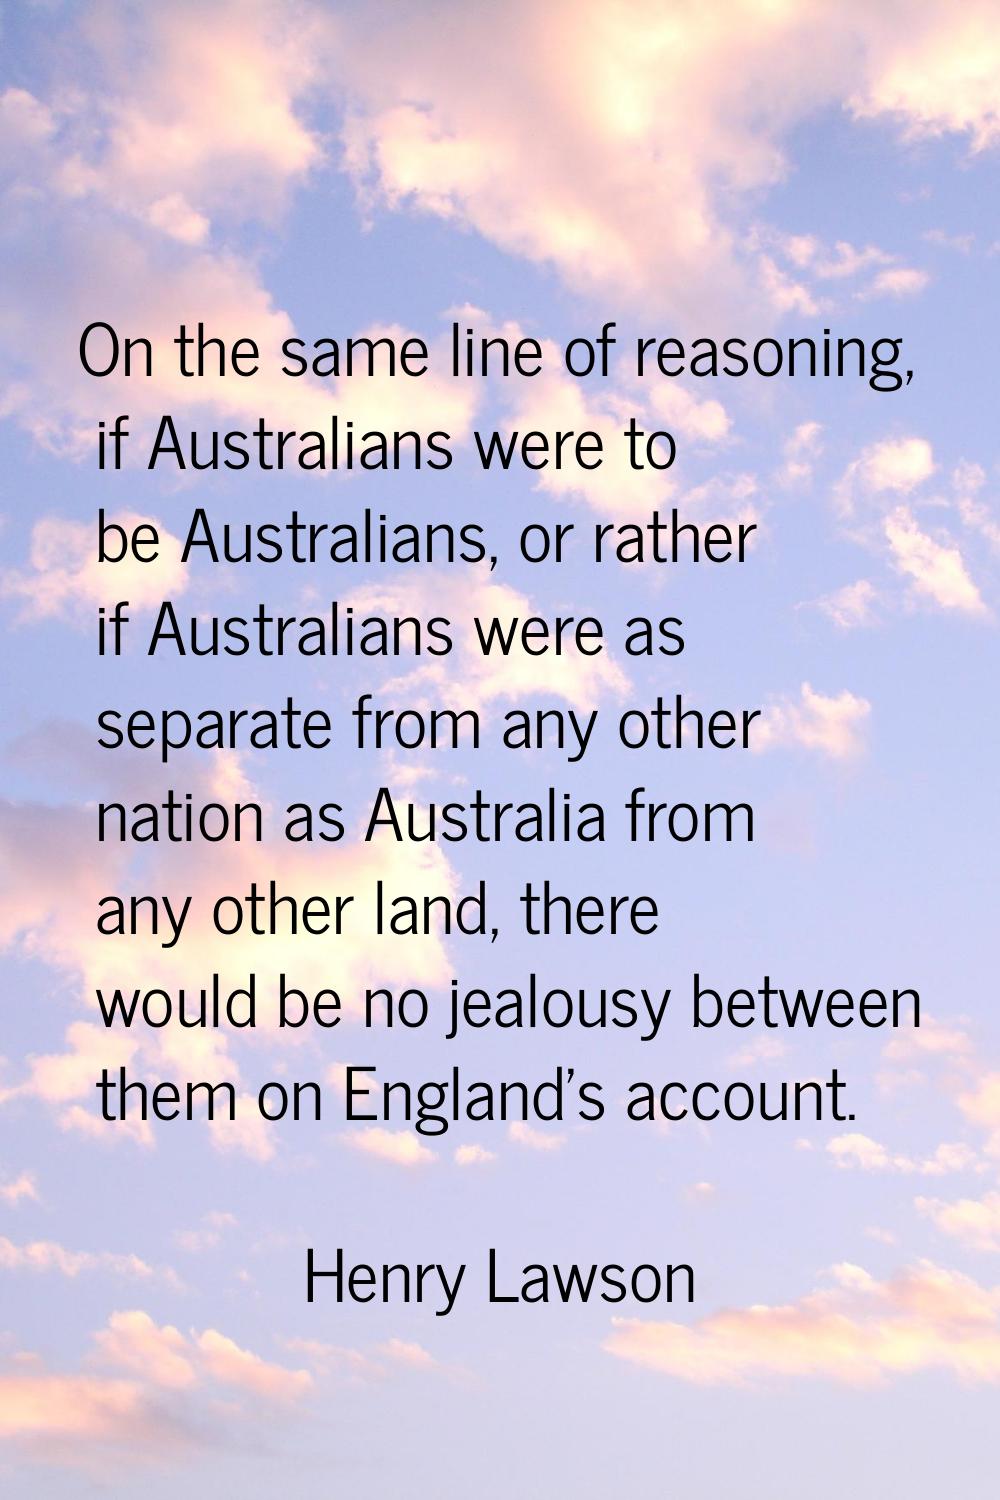 On the same line of reasoning, if Australians were to be Australians, or rather if Australians were